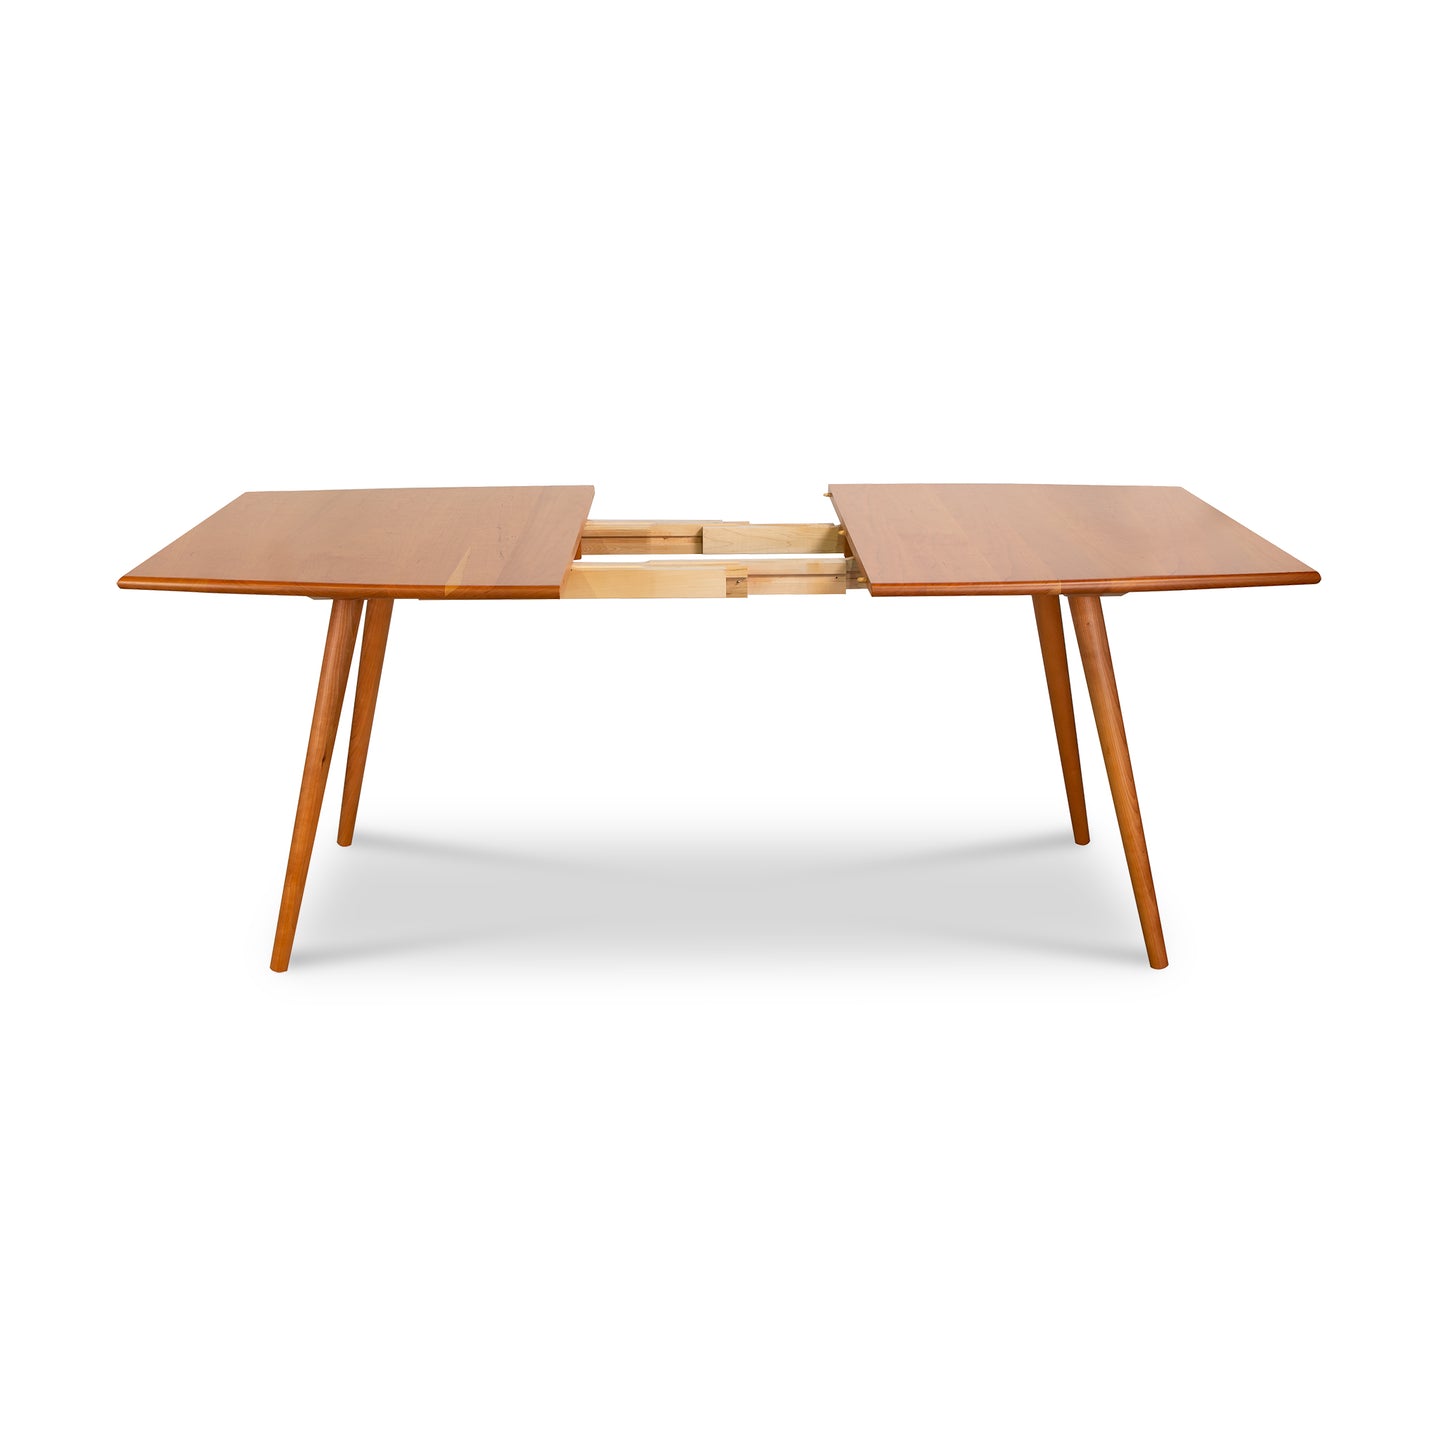 A mid-century modern Addison Boat Top Extension Dining Table - Floor Model from Lyndon Furniture with two legs.